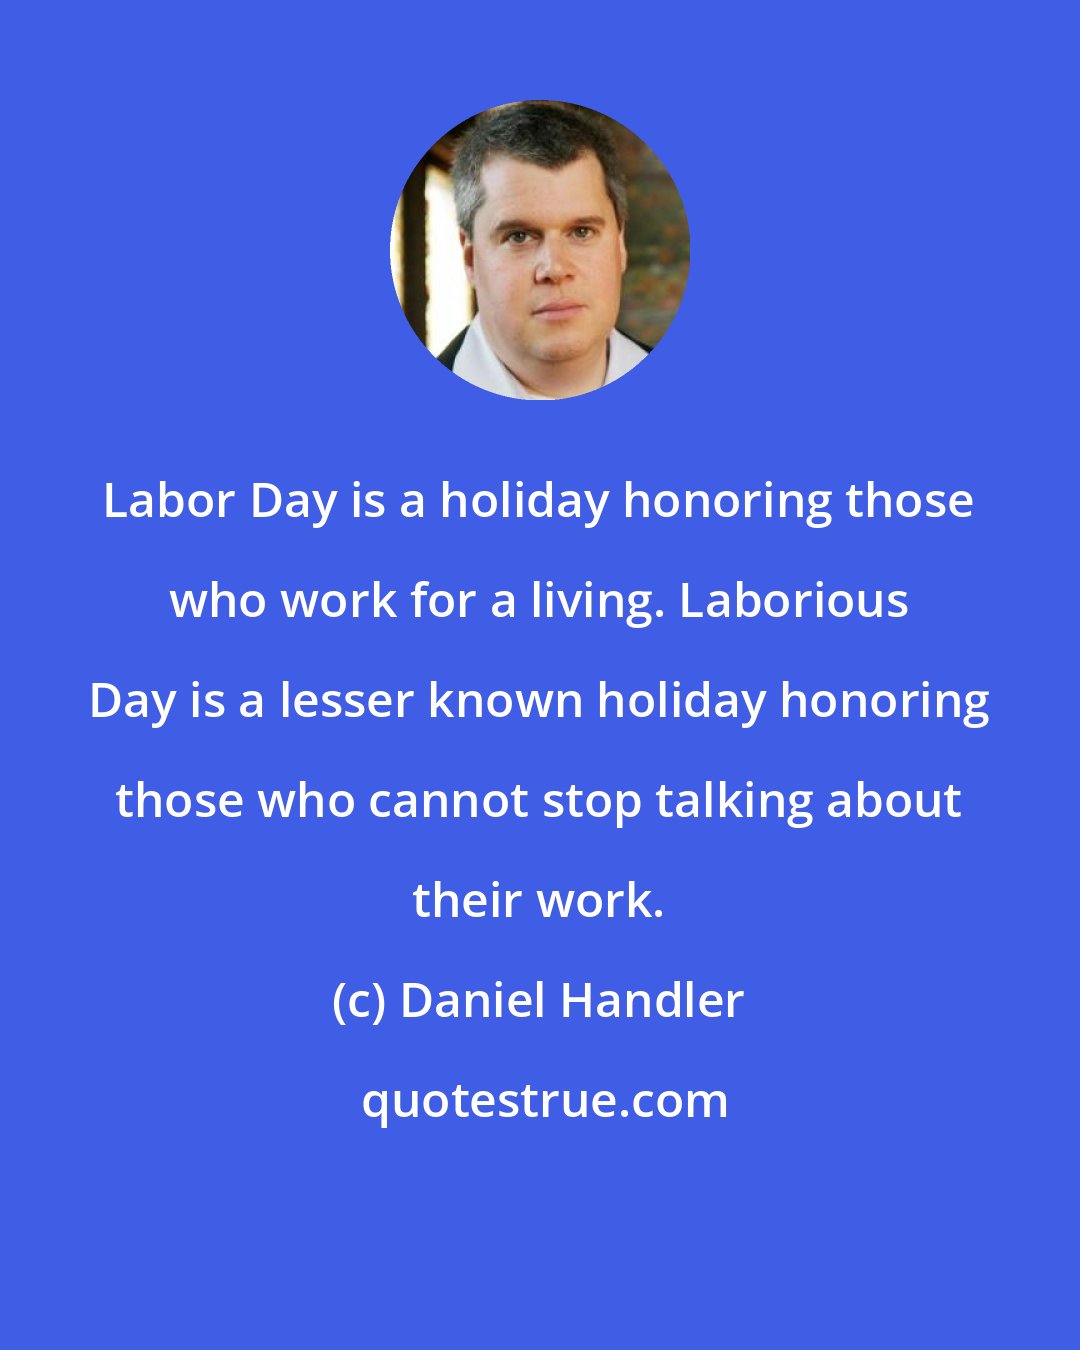 Daniel Handler: Labor Day is a holiday honoring those who work for a living. Laborious Day is a lesser known holiday honoring those who cannot stop talking about their work.